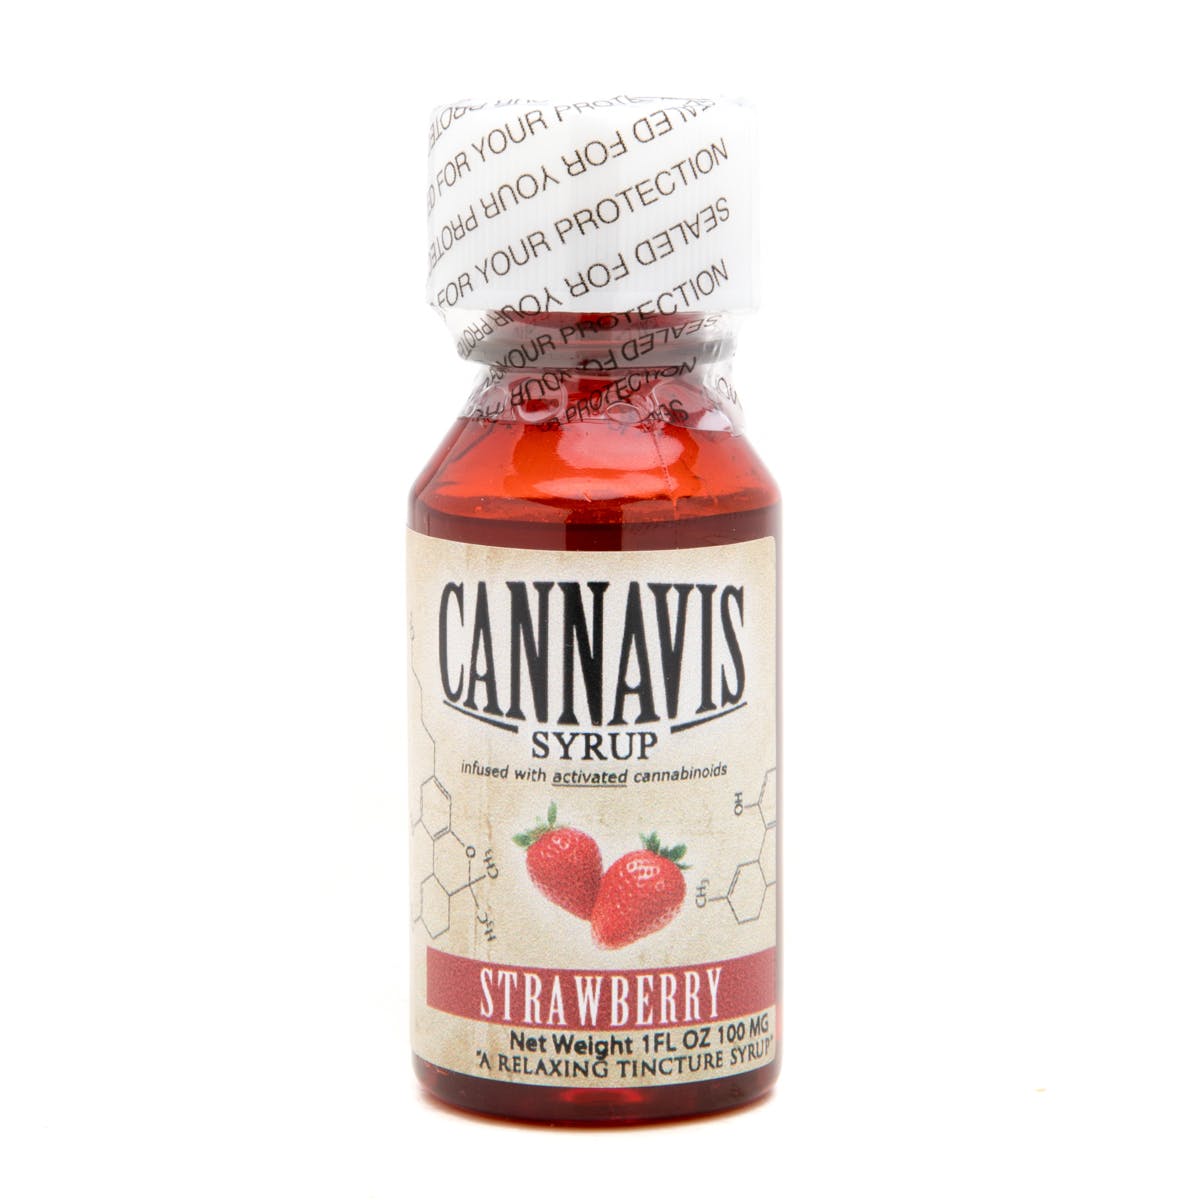 marijuana-dispensaries-scooters-in-los-angeles-cannavis-syrup-2c-strawberry-100mg